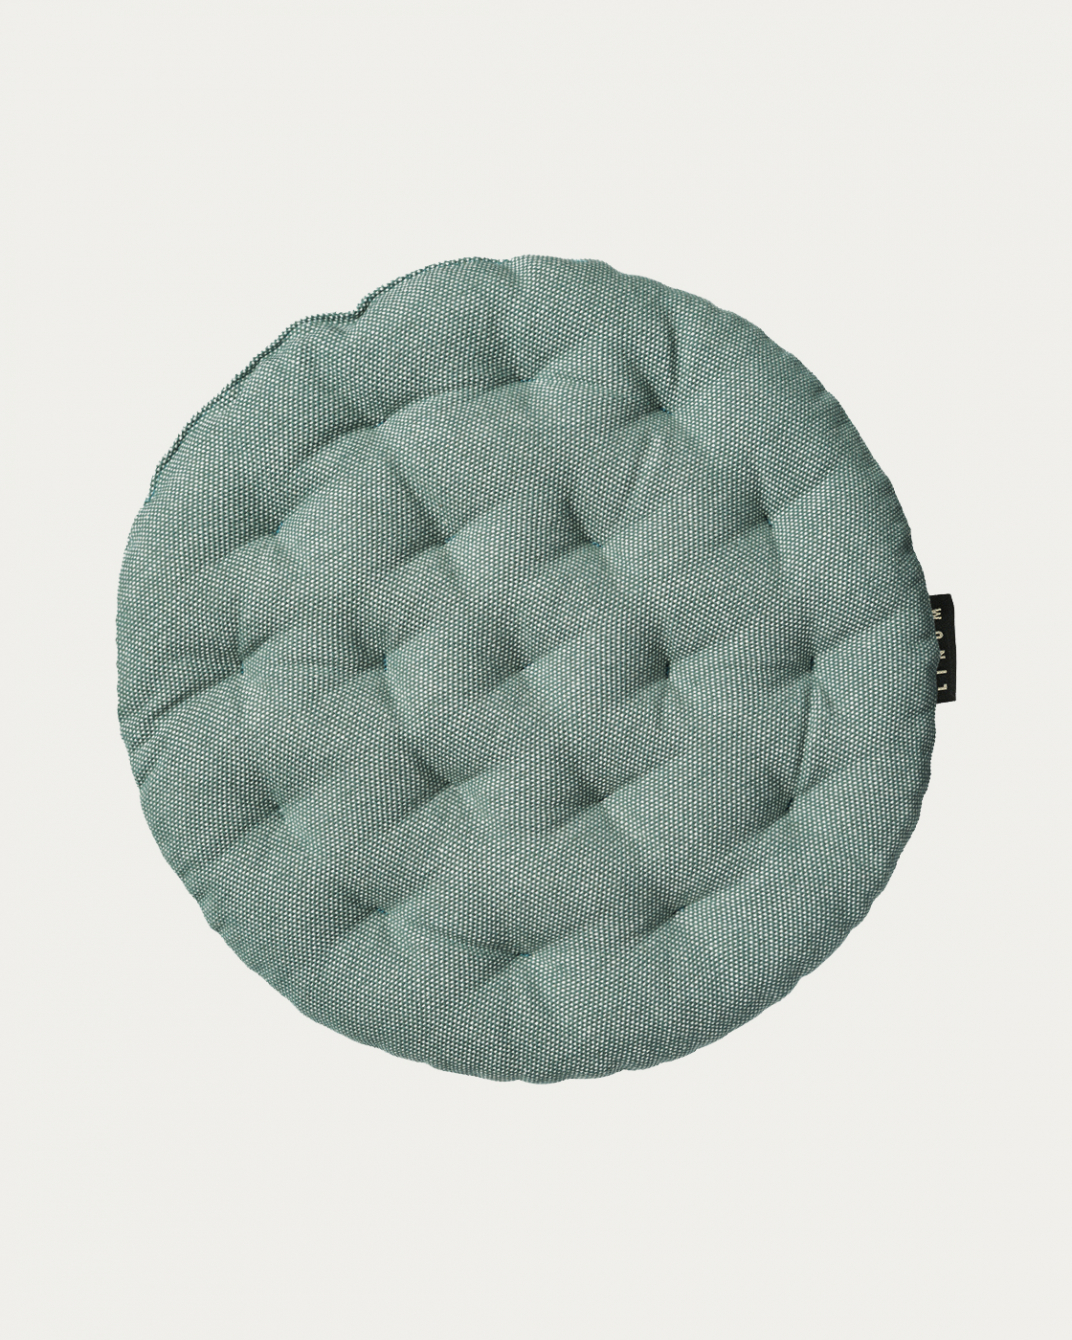 Product image dark grey turquoise PEPPER seat cushion made of soft cotton with recycled polyester filling from LINUM DESIGN. Size ø37 cm.